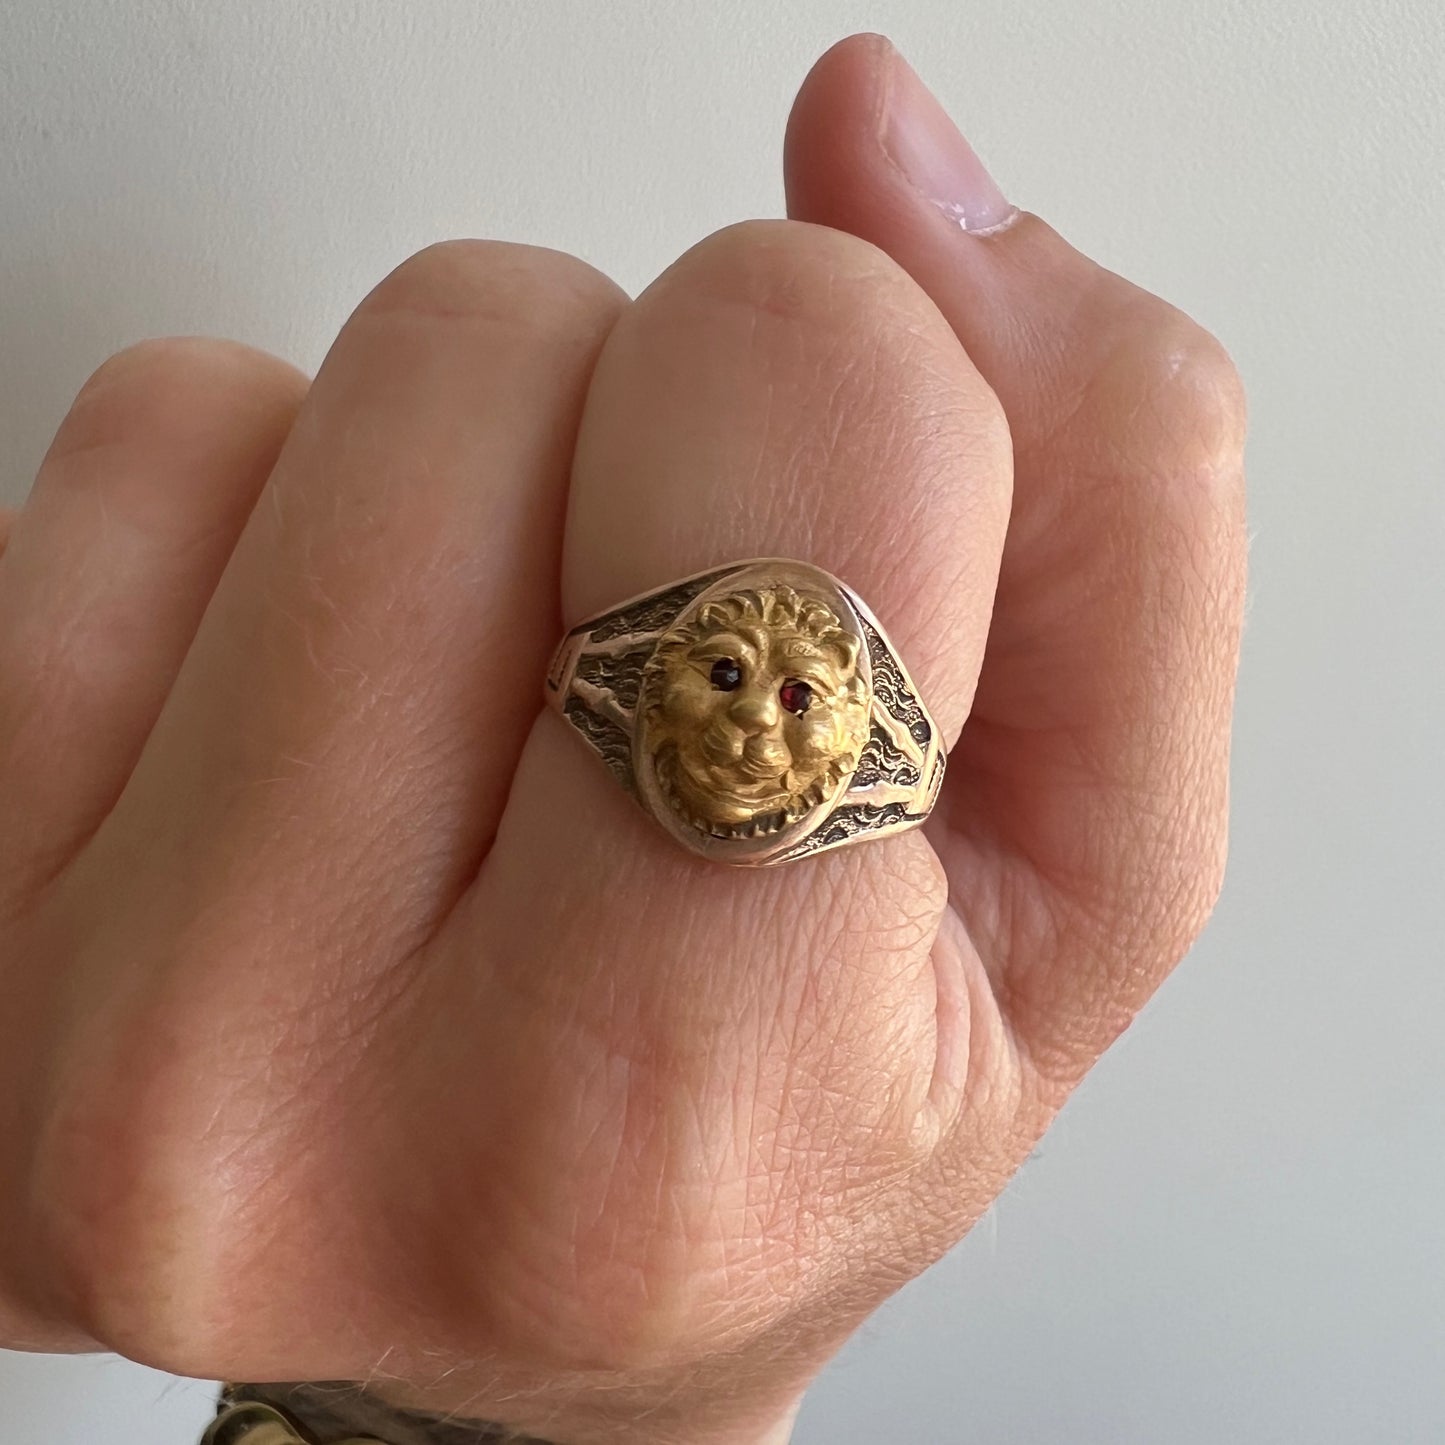 reimagined V I N T A G E // sunshine beast / 10k rose and yellow gold signet lion sun ring / size 7